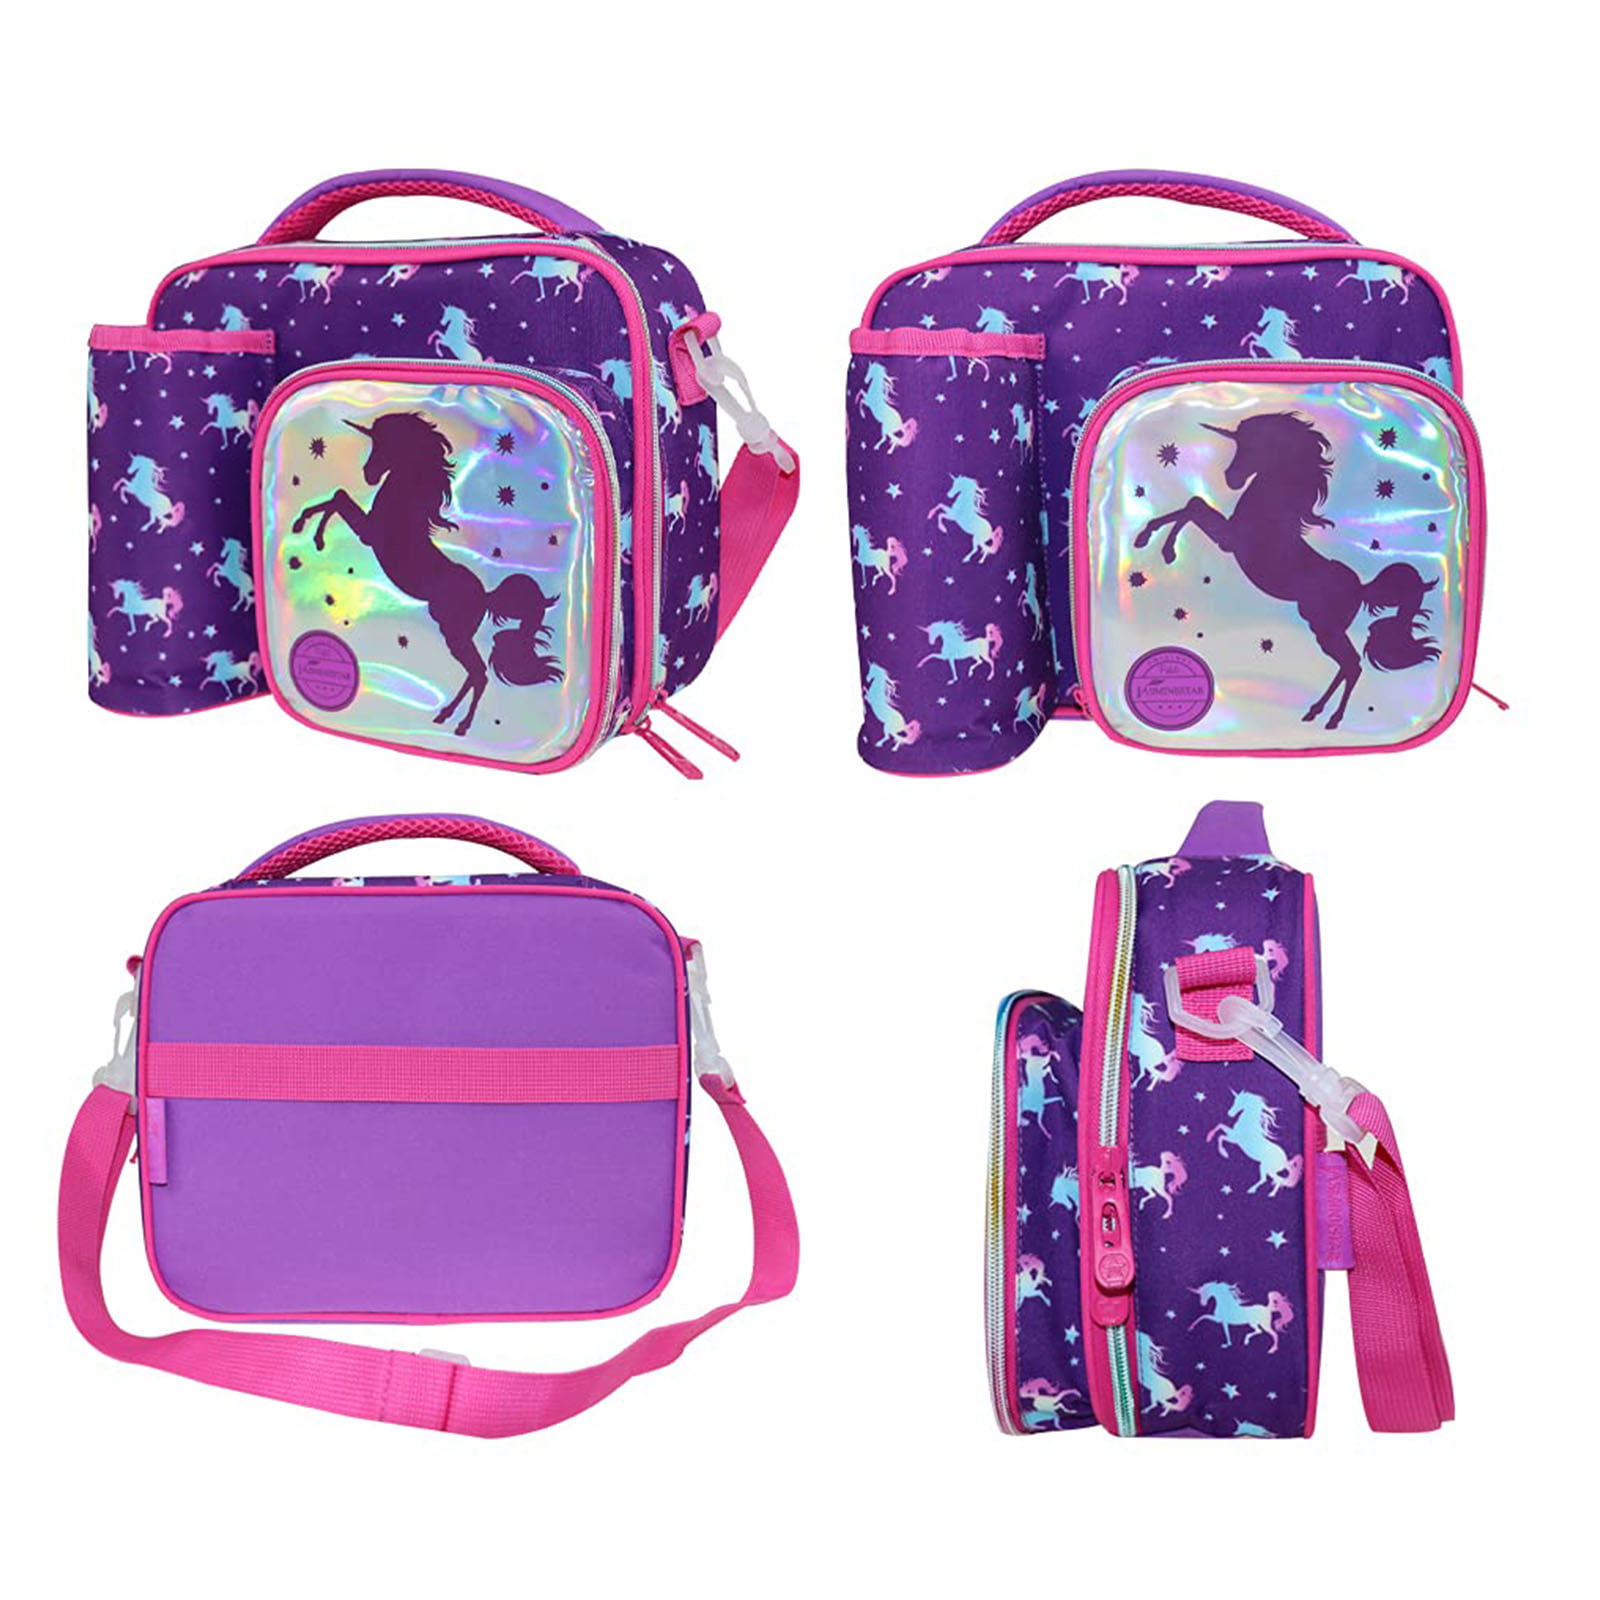 Mqing Lunch Bag Multiple Pockets Large Capacity Portable Girl Lunch Box Cute Insulated Bento Bag for Office School, Adult Unisex, Purple